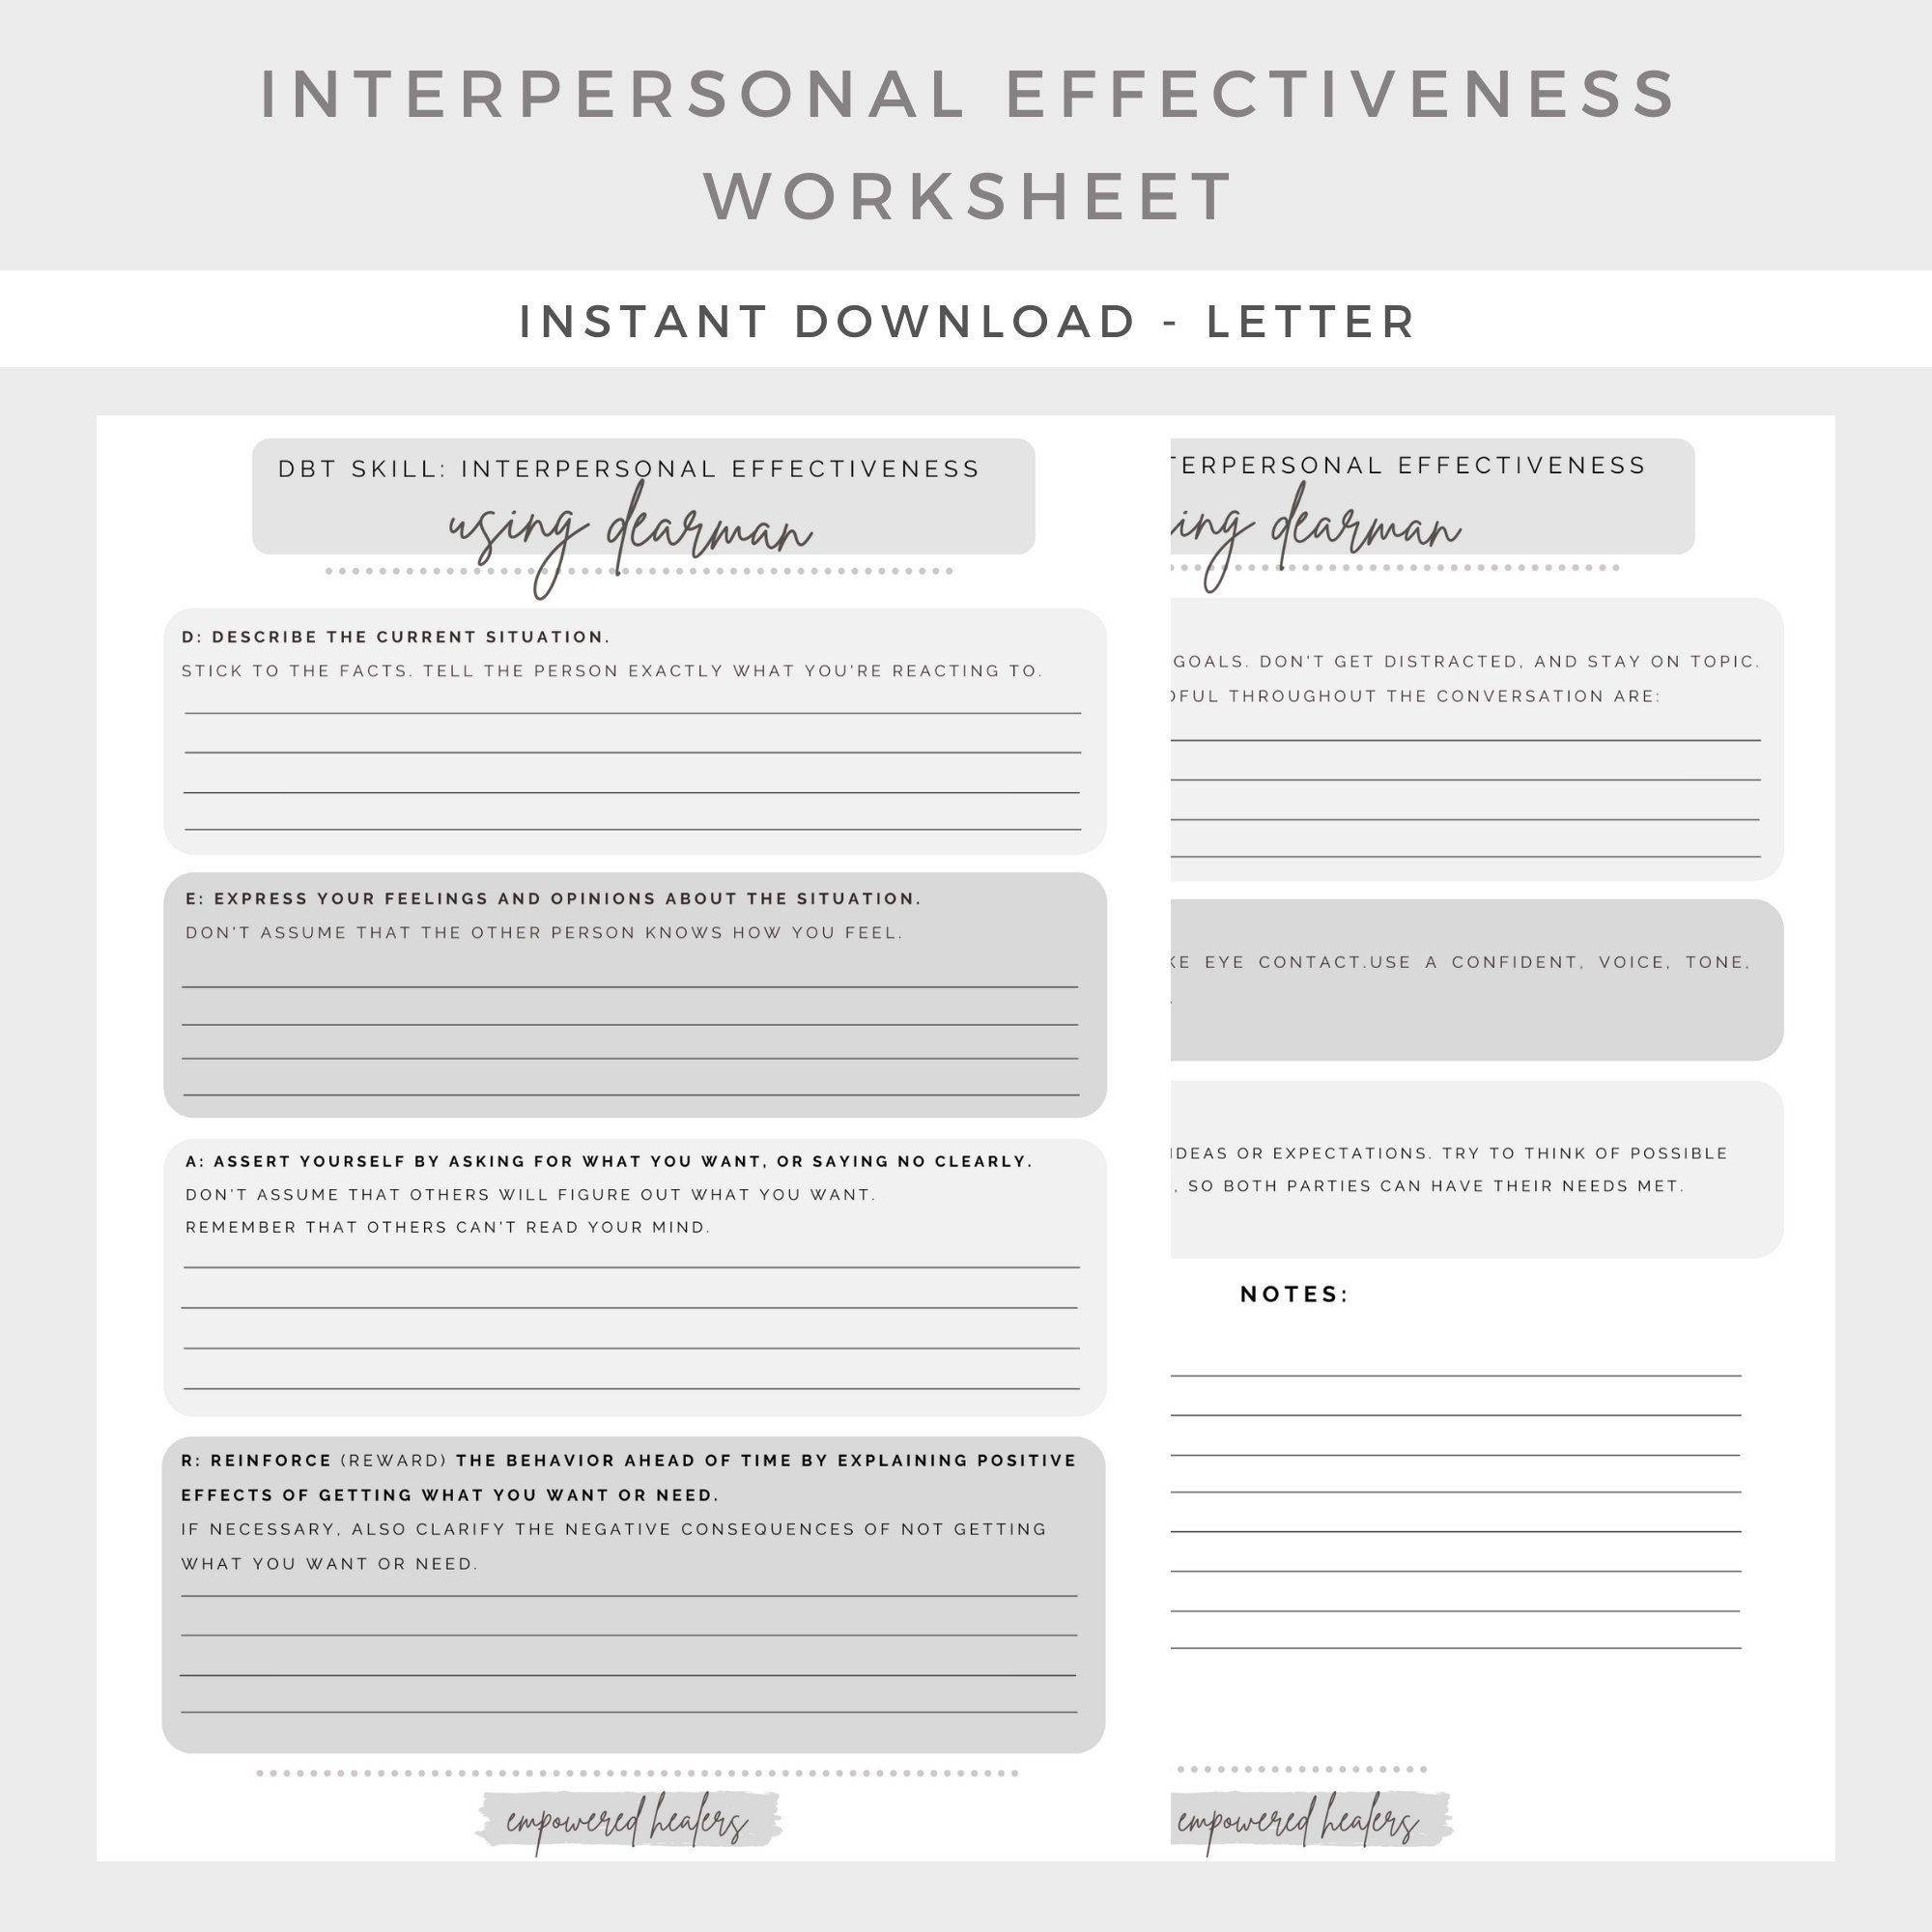 Interpersonal Effectiveness Worksheet DEARMAN Dbt mental Health Depression Anxiety therapy Journal Counseling Binder Planner printable Etsy